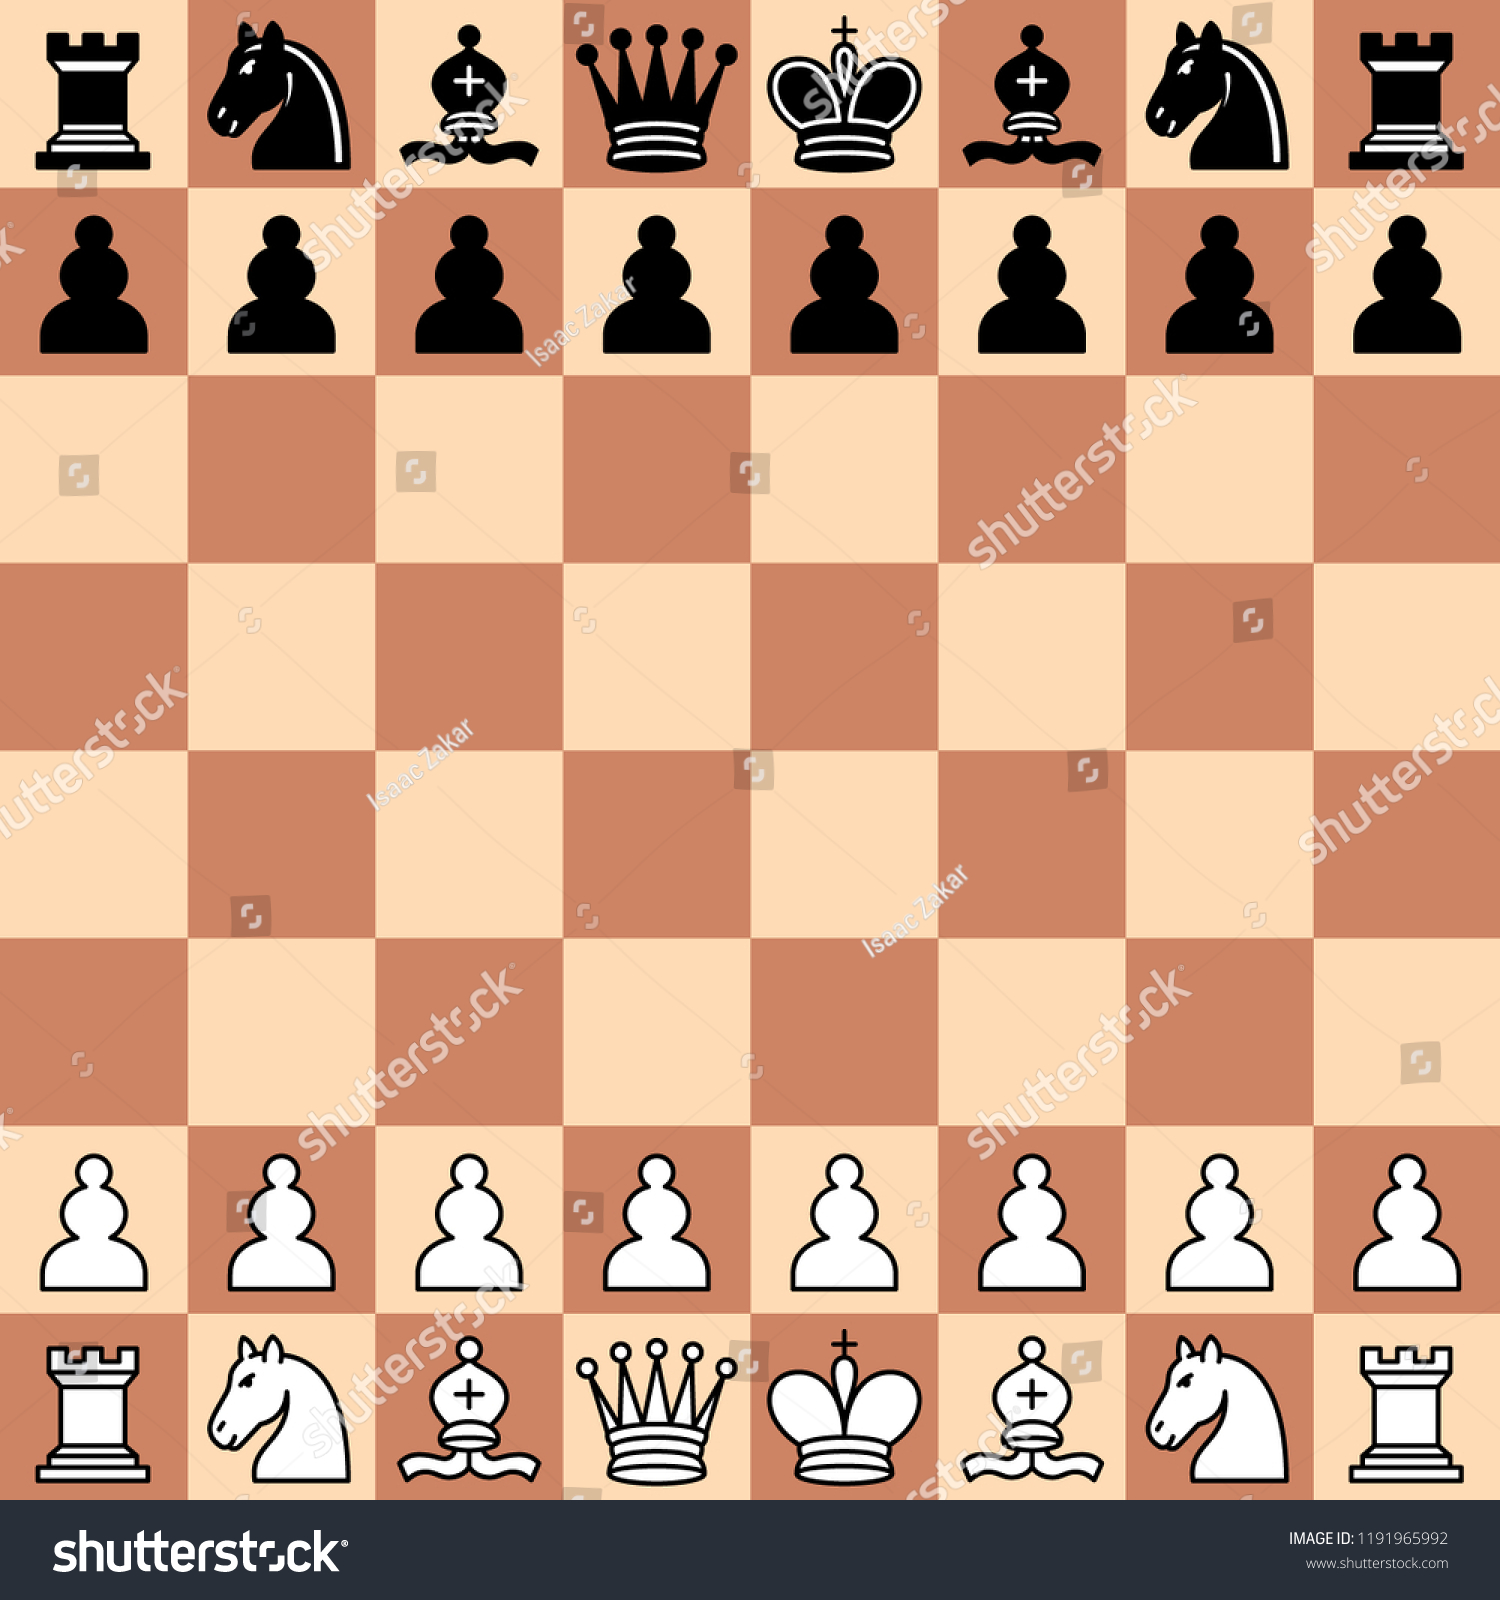 SVG of Vector flat chess board with black and white pieces svg